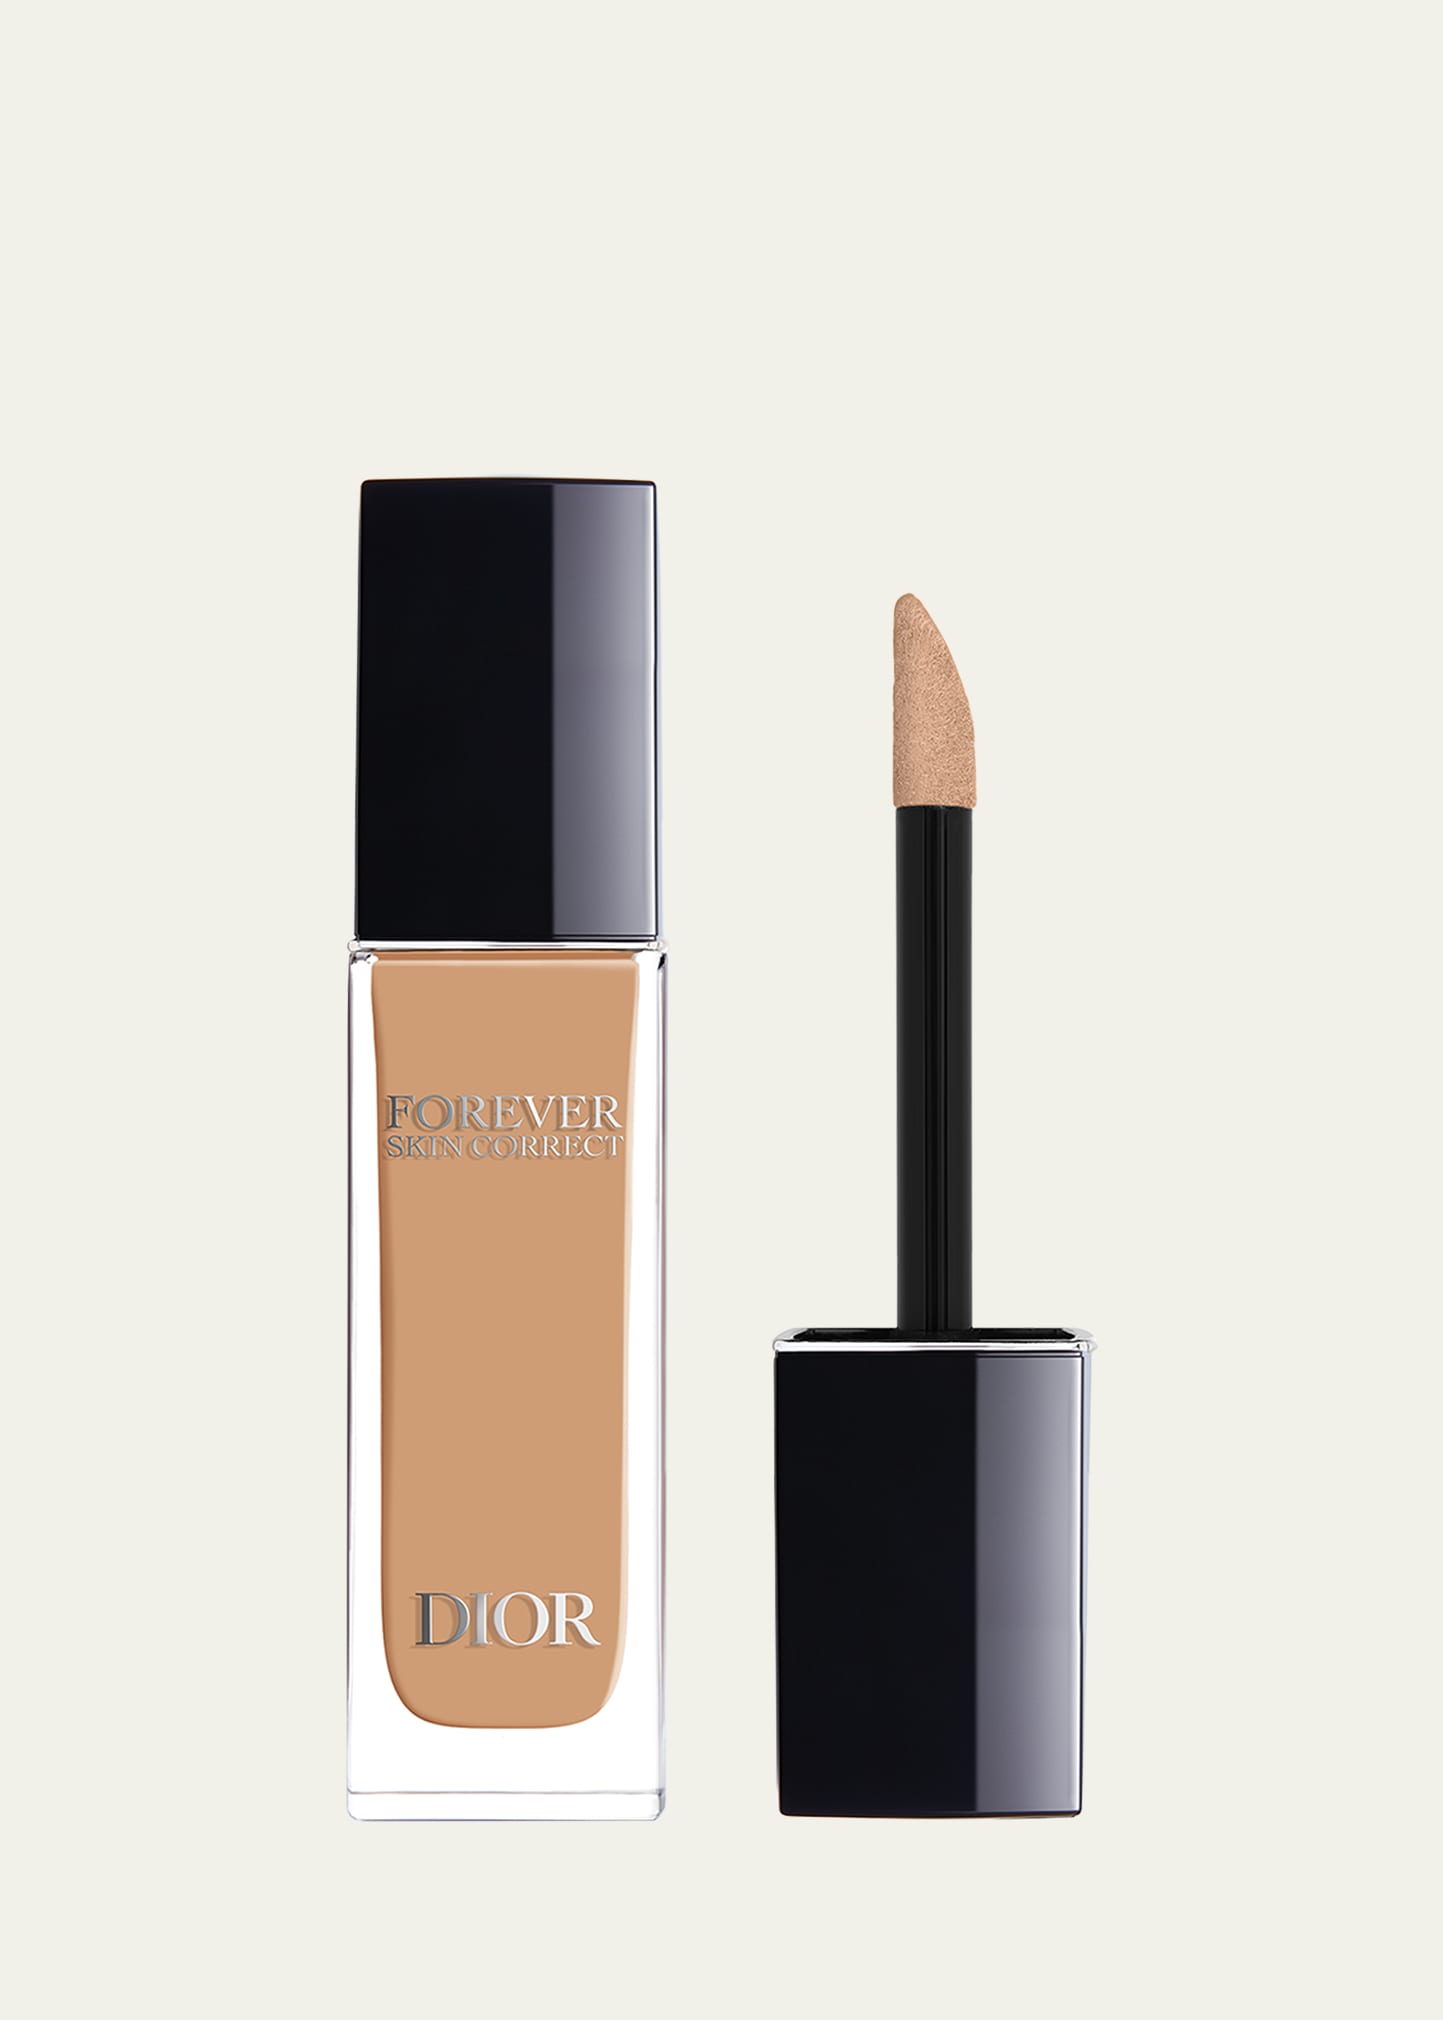 Dior Forever Skin Correct Full-coverage Concealer In 4 W Warm